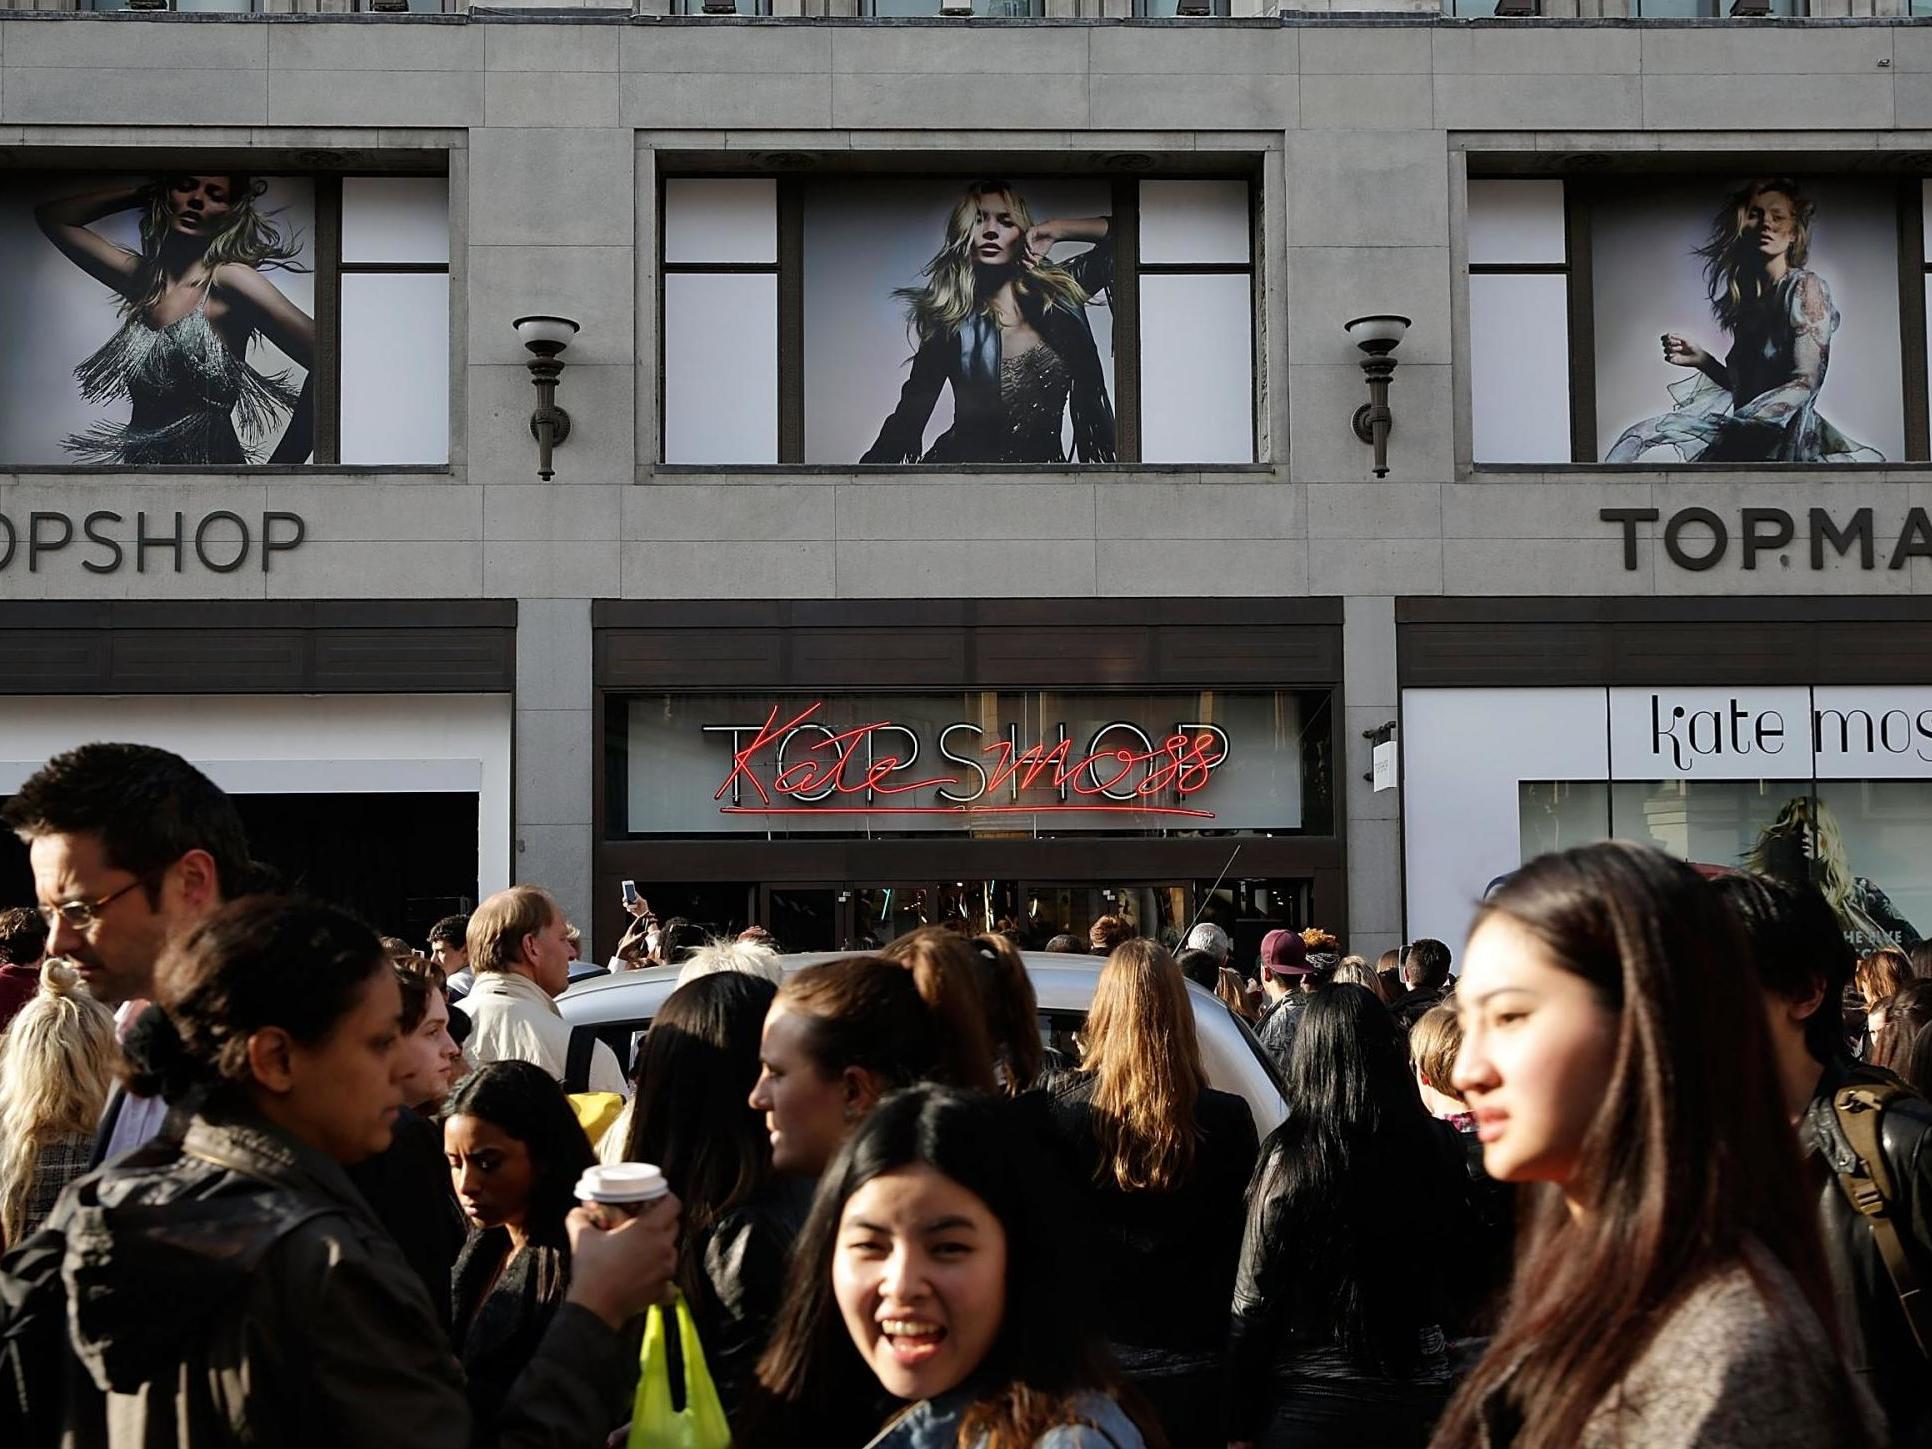 Topshops have long been a high street staple but earlier this year it was decided 23 would close